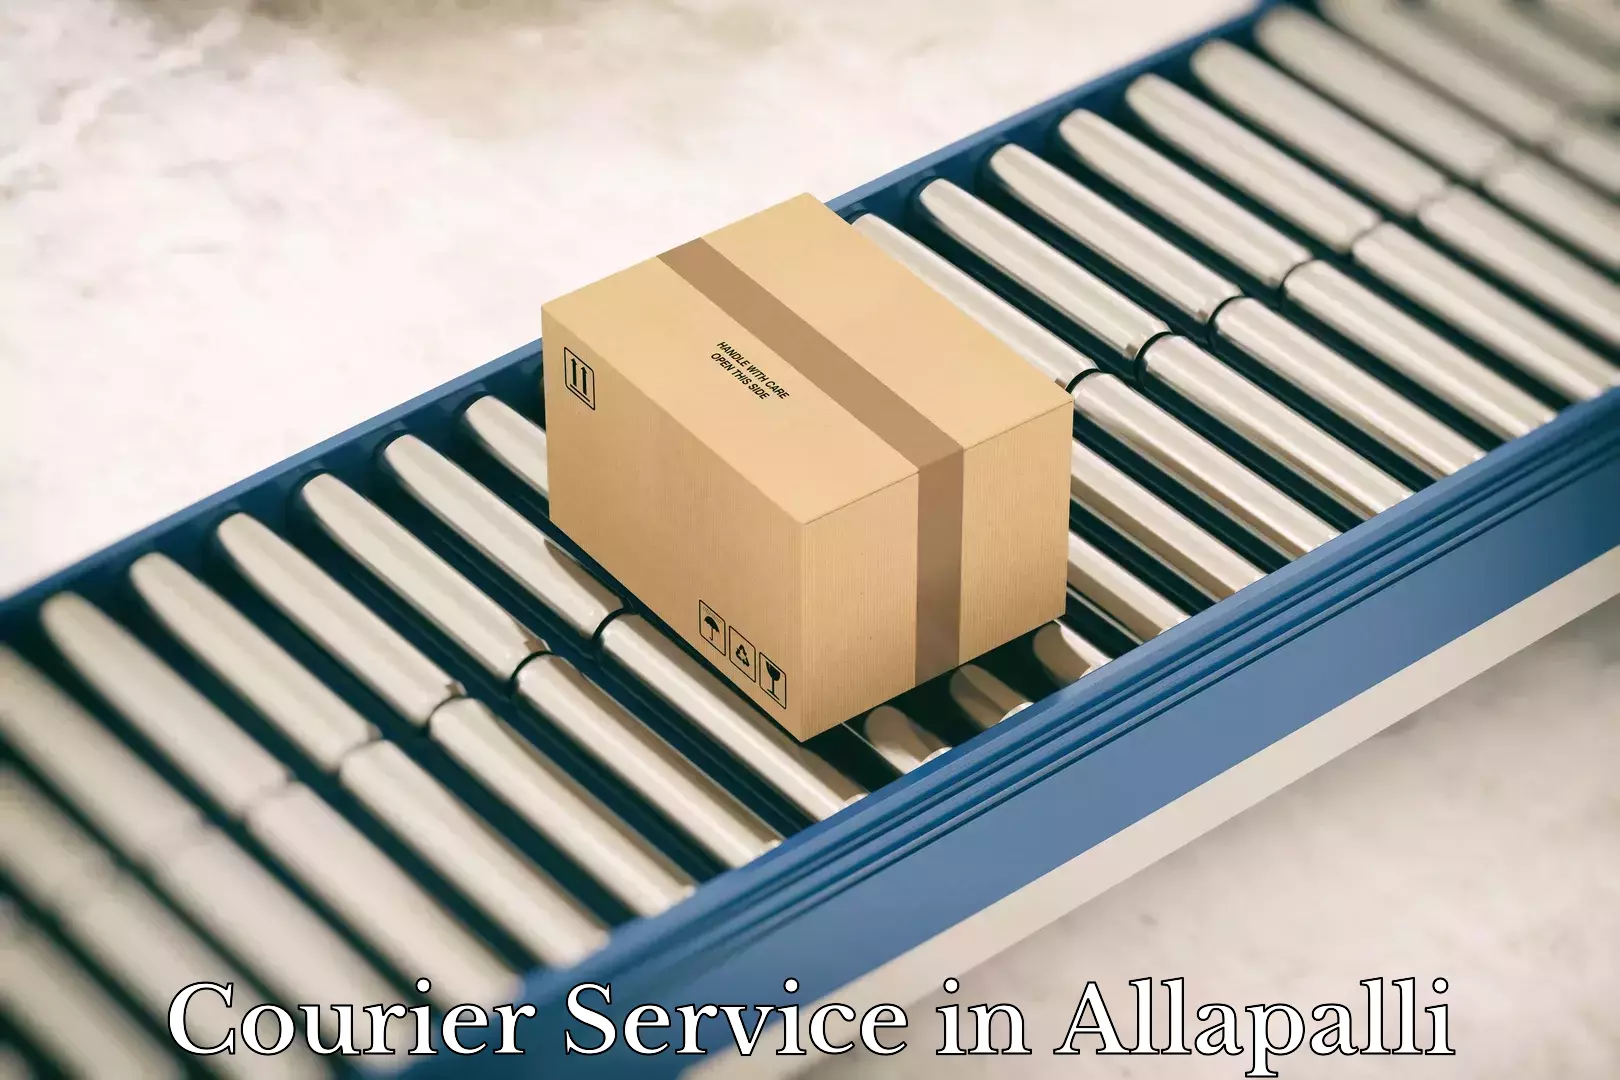 Courier service efficiency in Allapalli